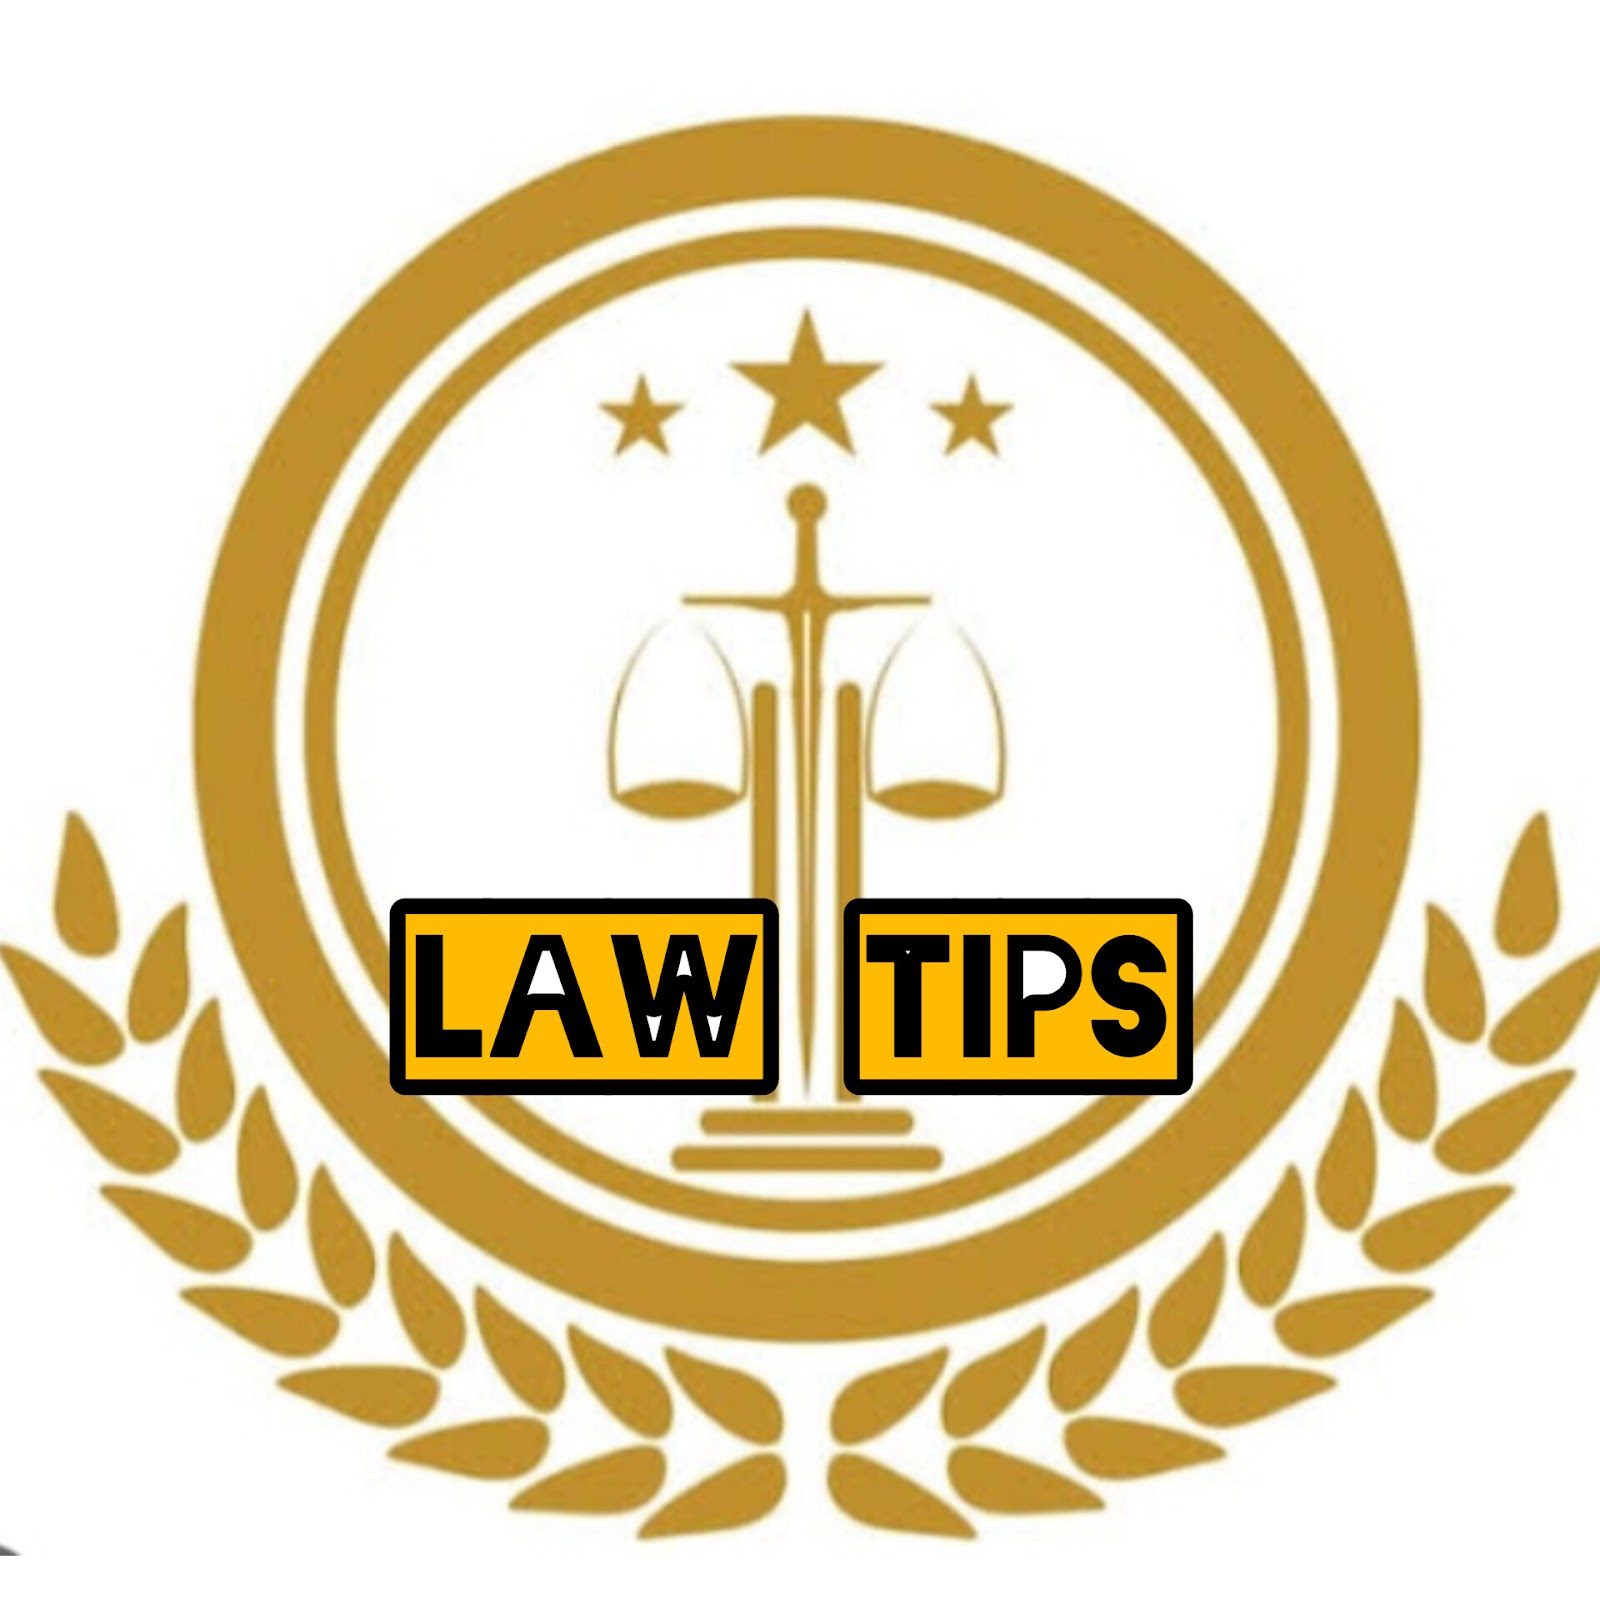 Law Tips